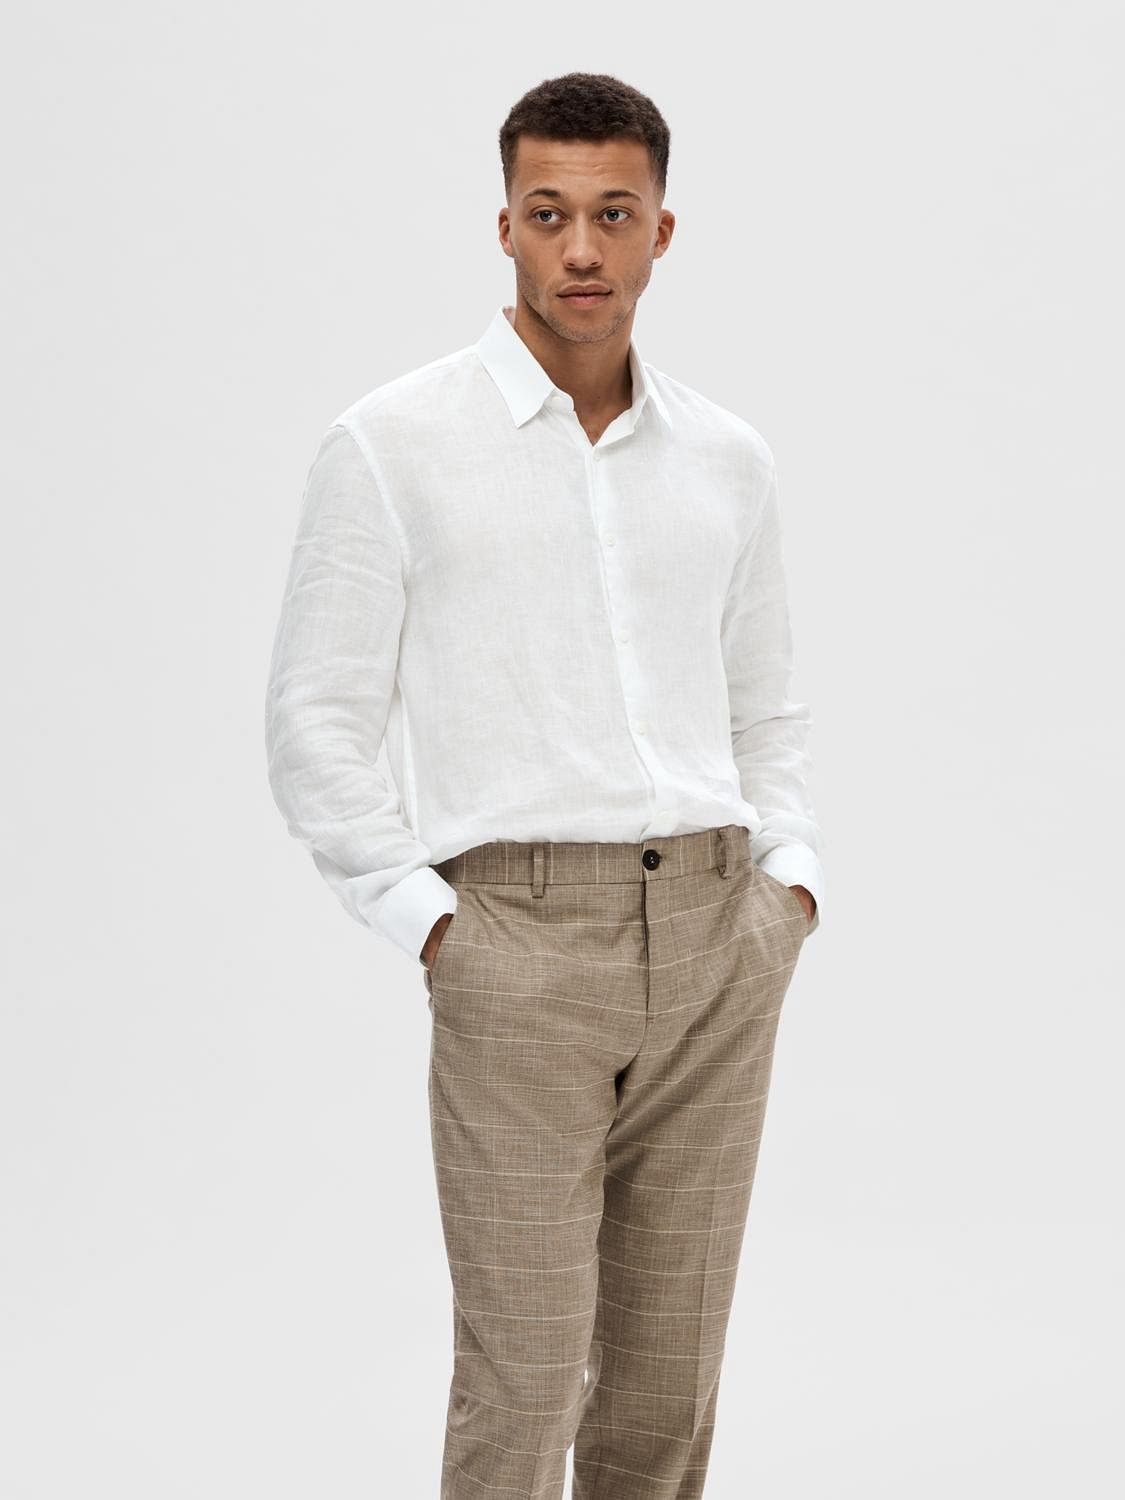 Buy Comfy Classics: Classic White Linen Pants for Men, Wedding Dress Chino  Pants, Mens Stylish Linen Trousers Online in India - Etsy